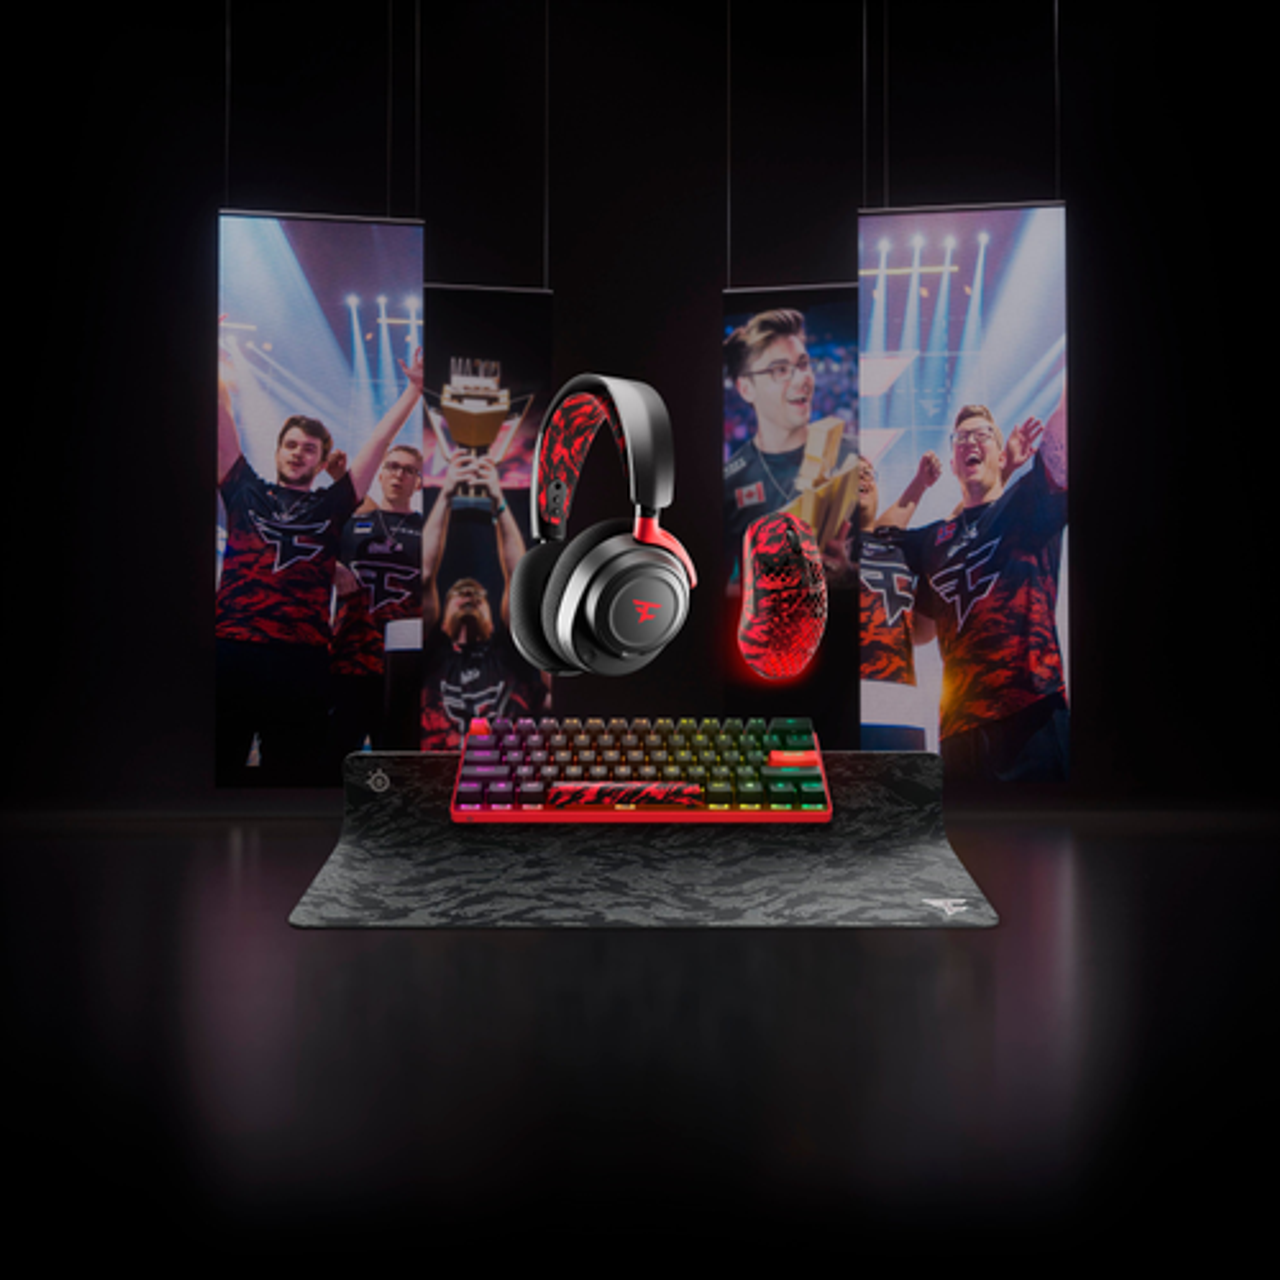 SteelSeries - Aerox 3 Super Light Honeycomb Wireless RGB Optical Gaming Mouse - FaZe Clan Limited Edition